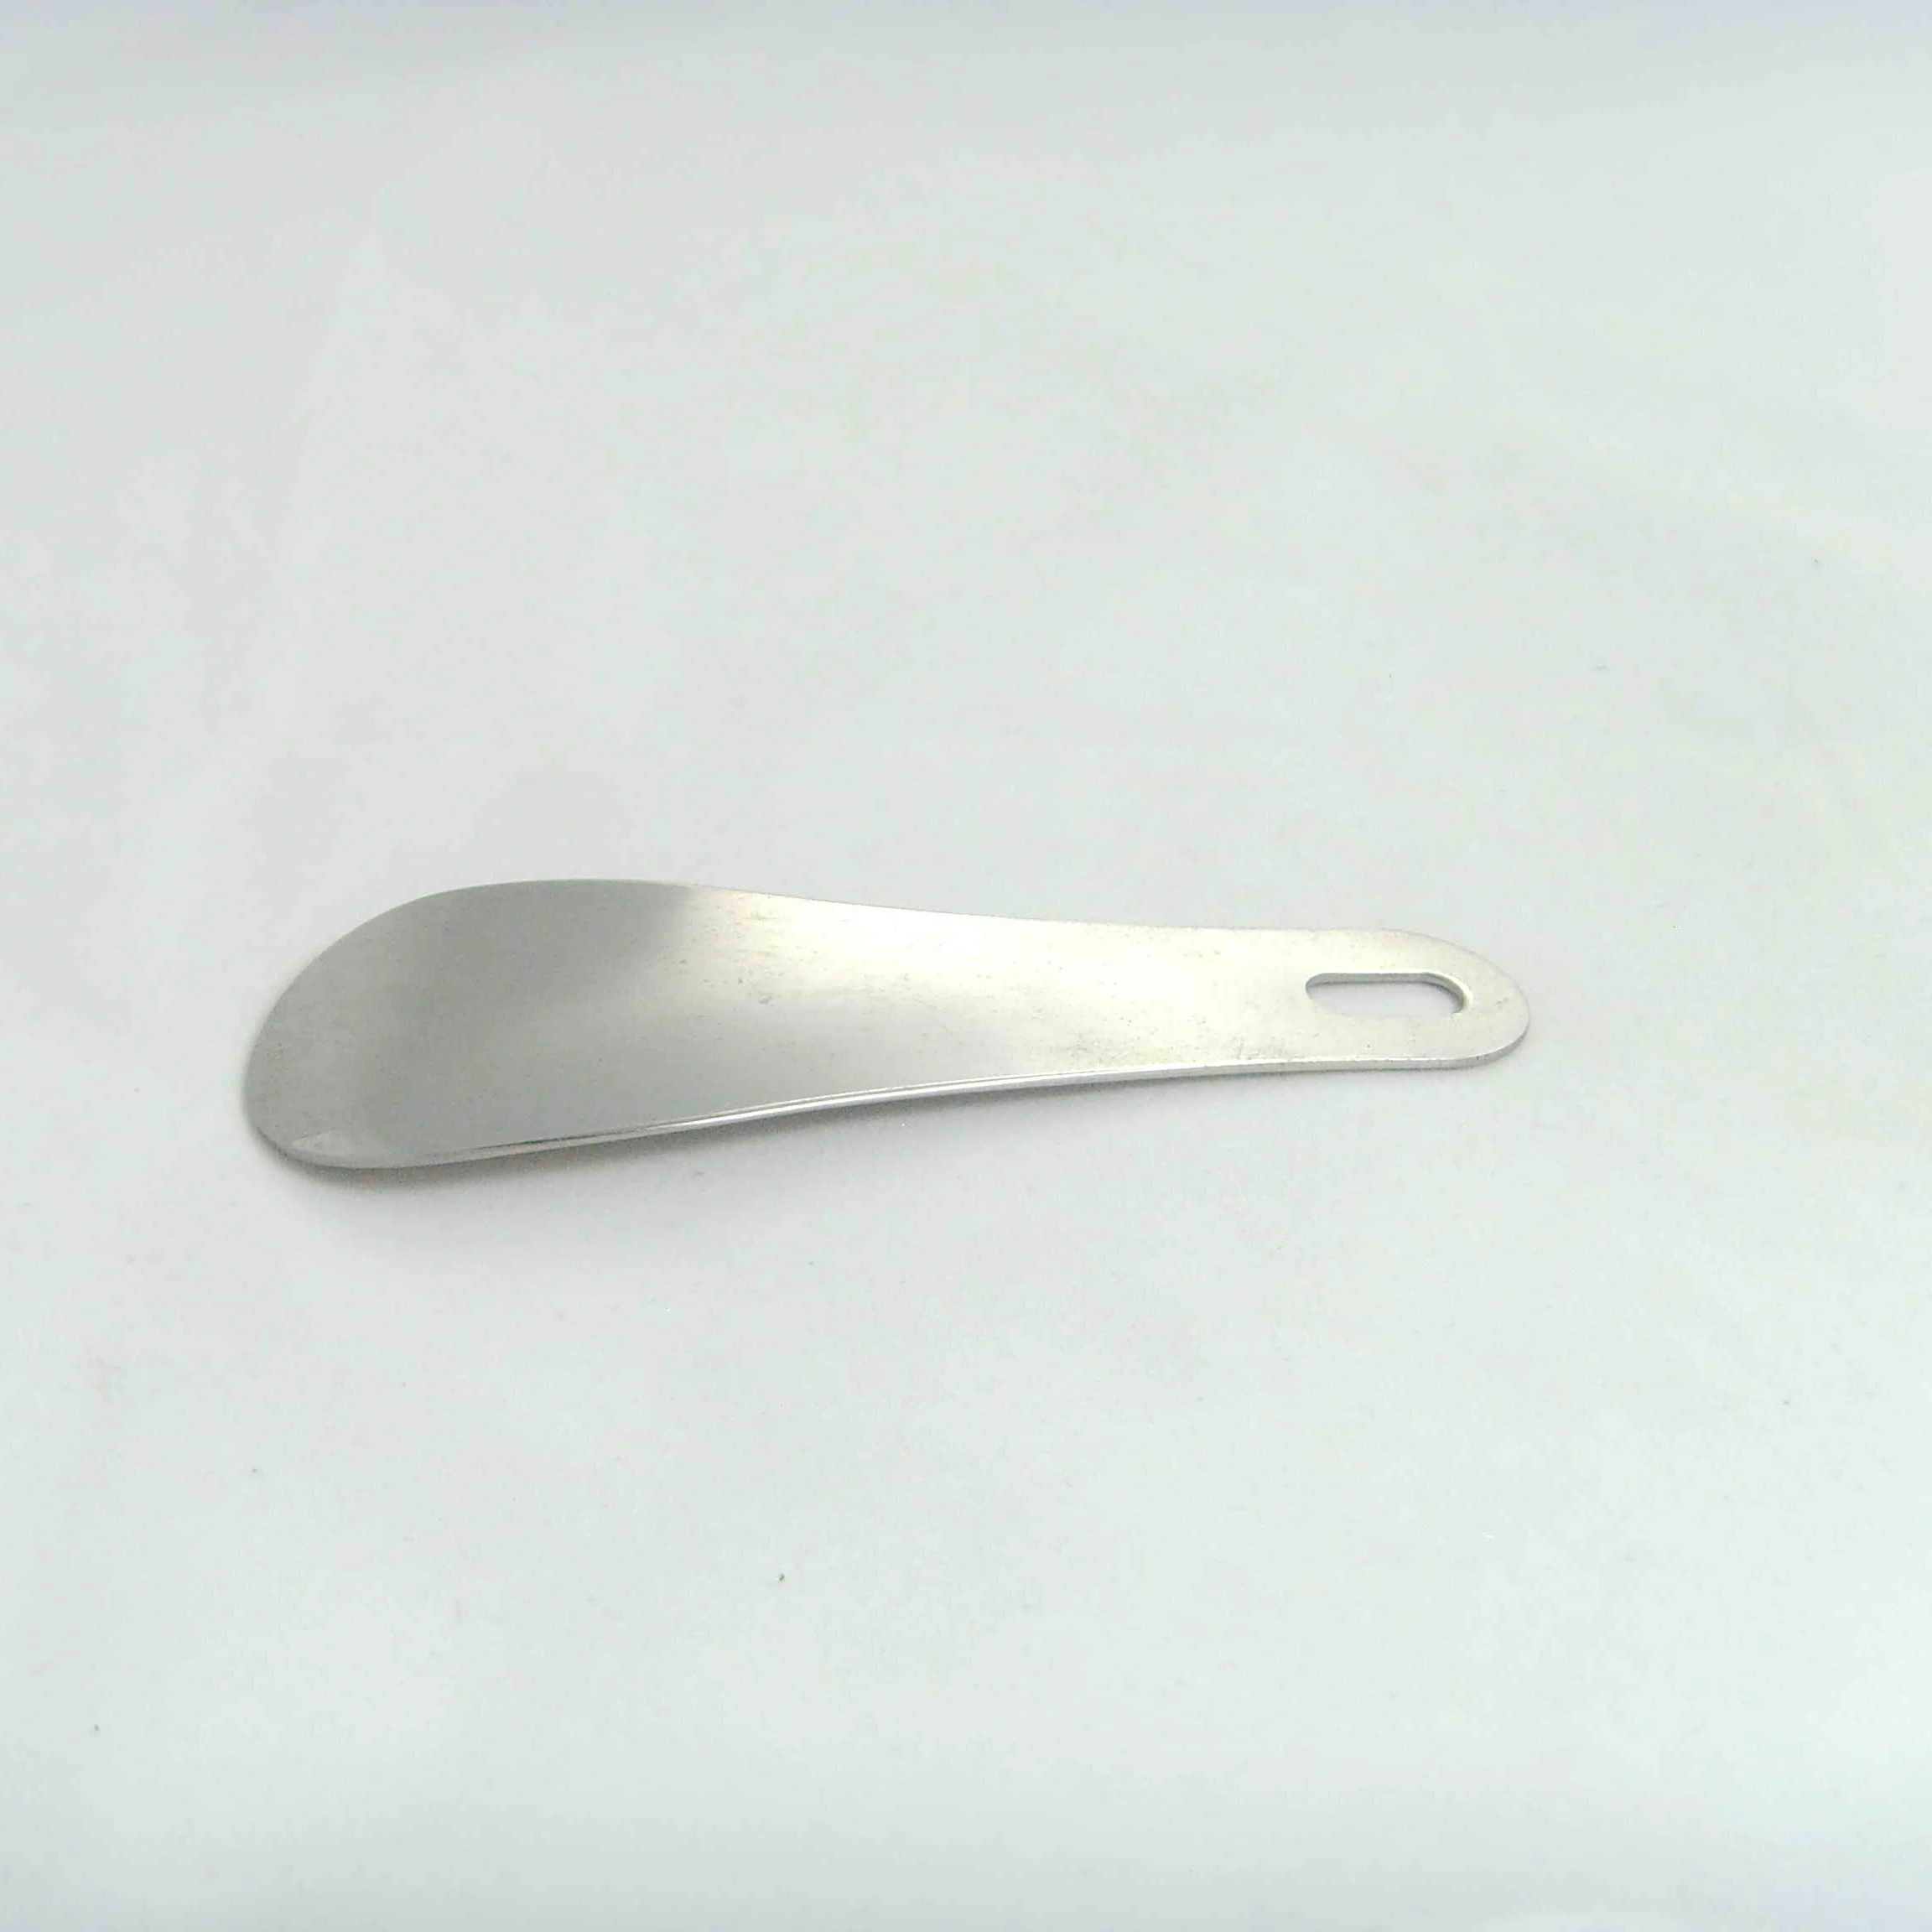 Long stainless steel shoe horn/metal shoehorn